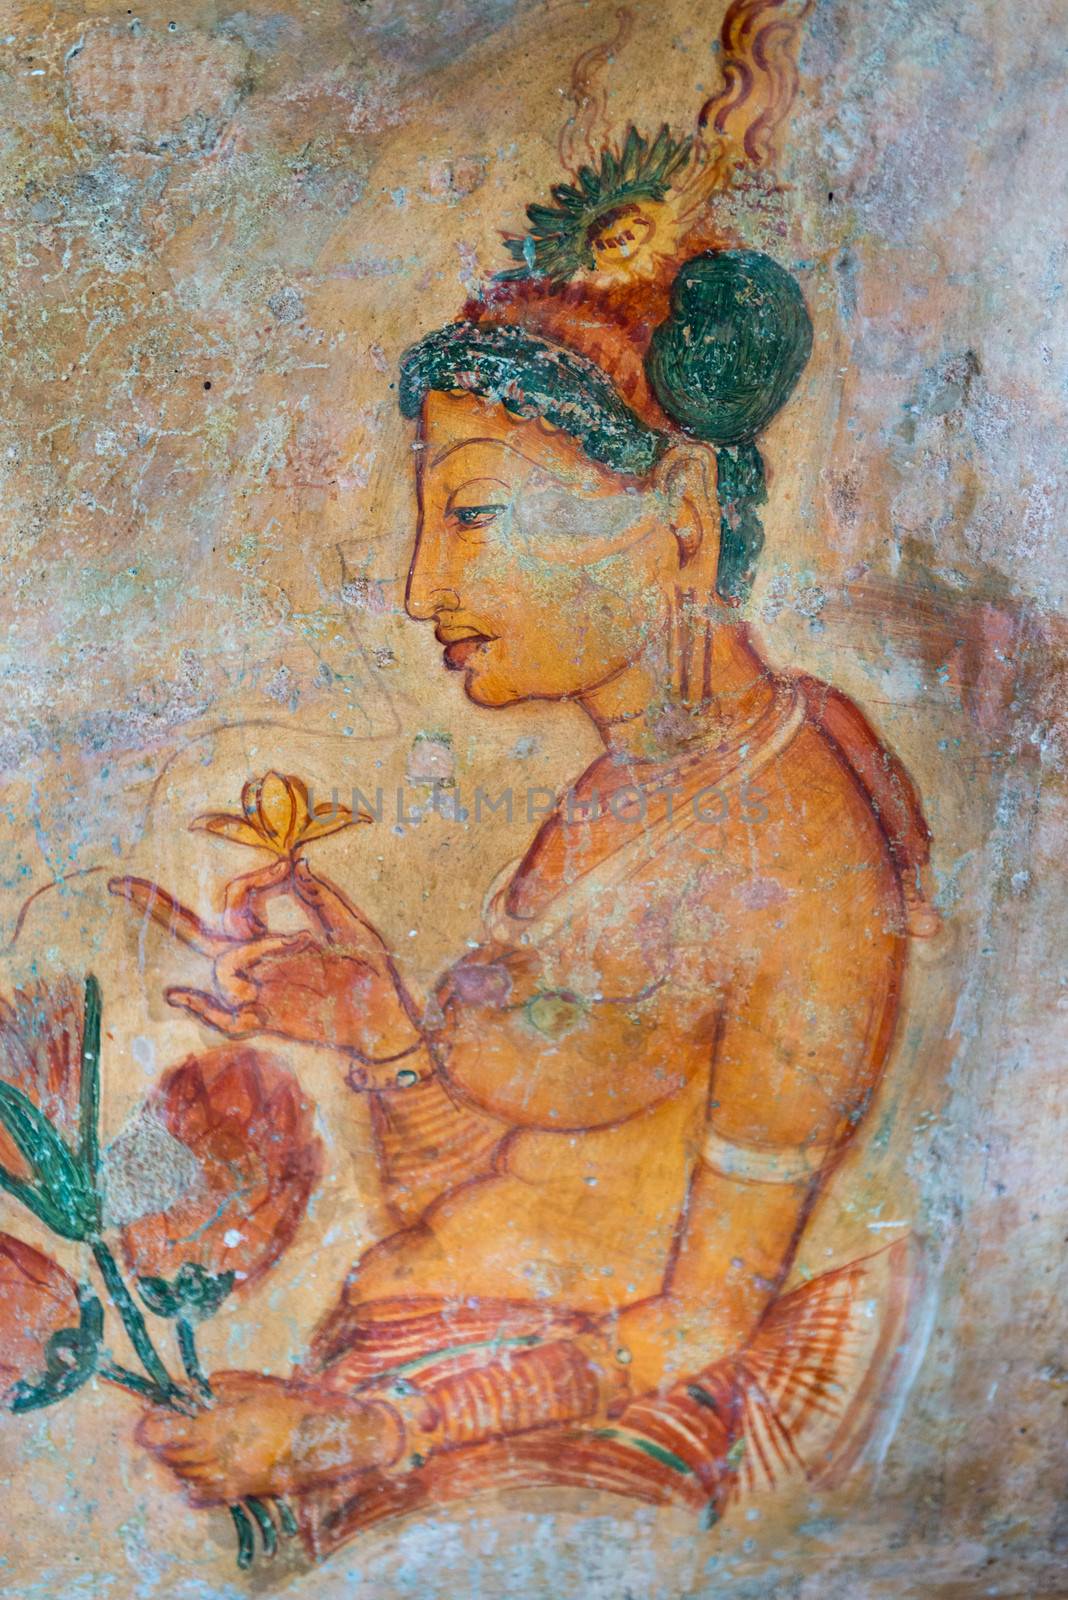 Ancient wall paintings of cloudy maiden with flower. One of the 5th century frescoes at the ancient rock fortress of Sigiriya, Sri Lanka. 